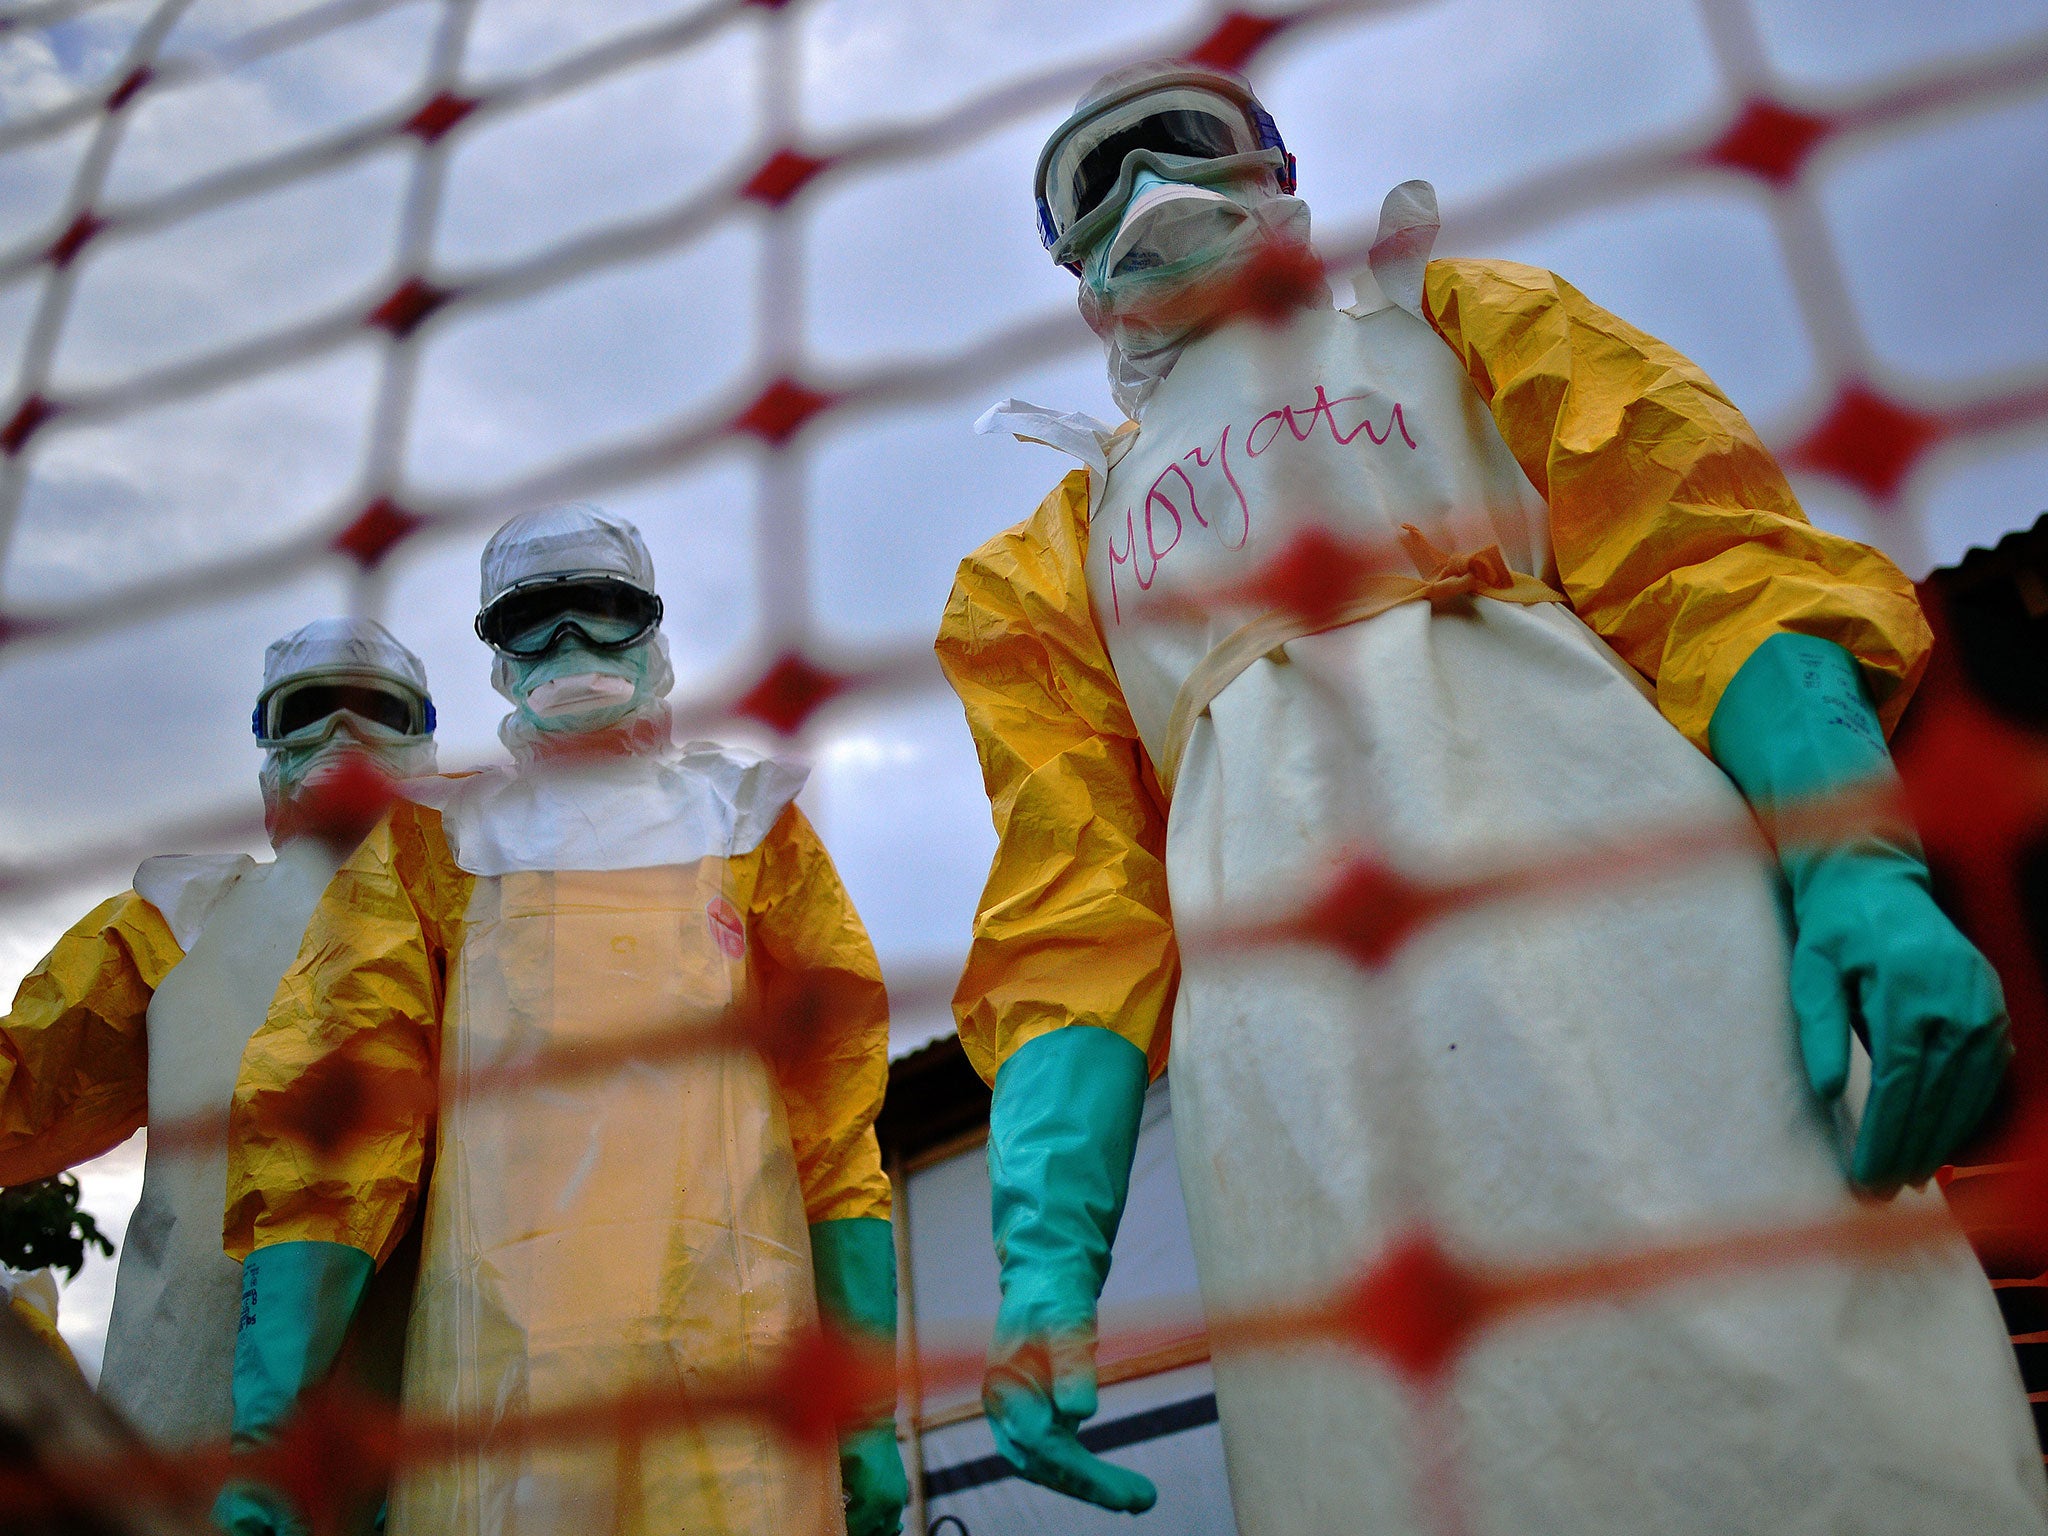 Médecins Sans Frontières medical staff wearing protective clothing treat the body of an Ebola victim